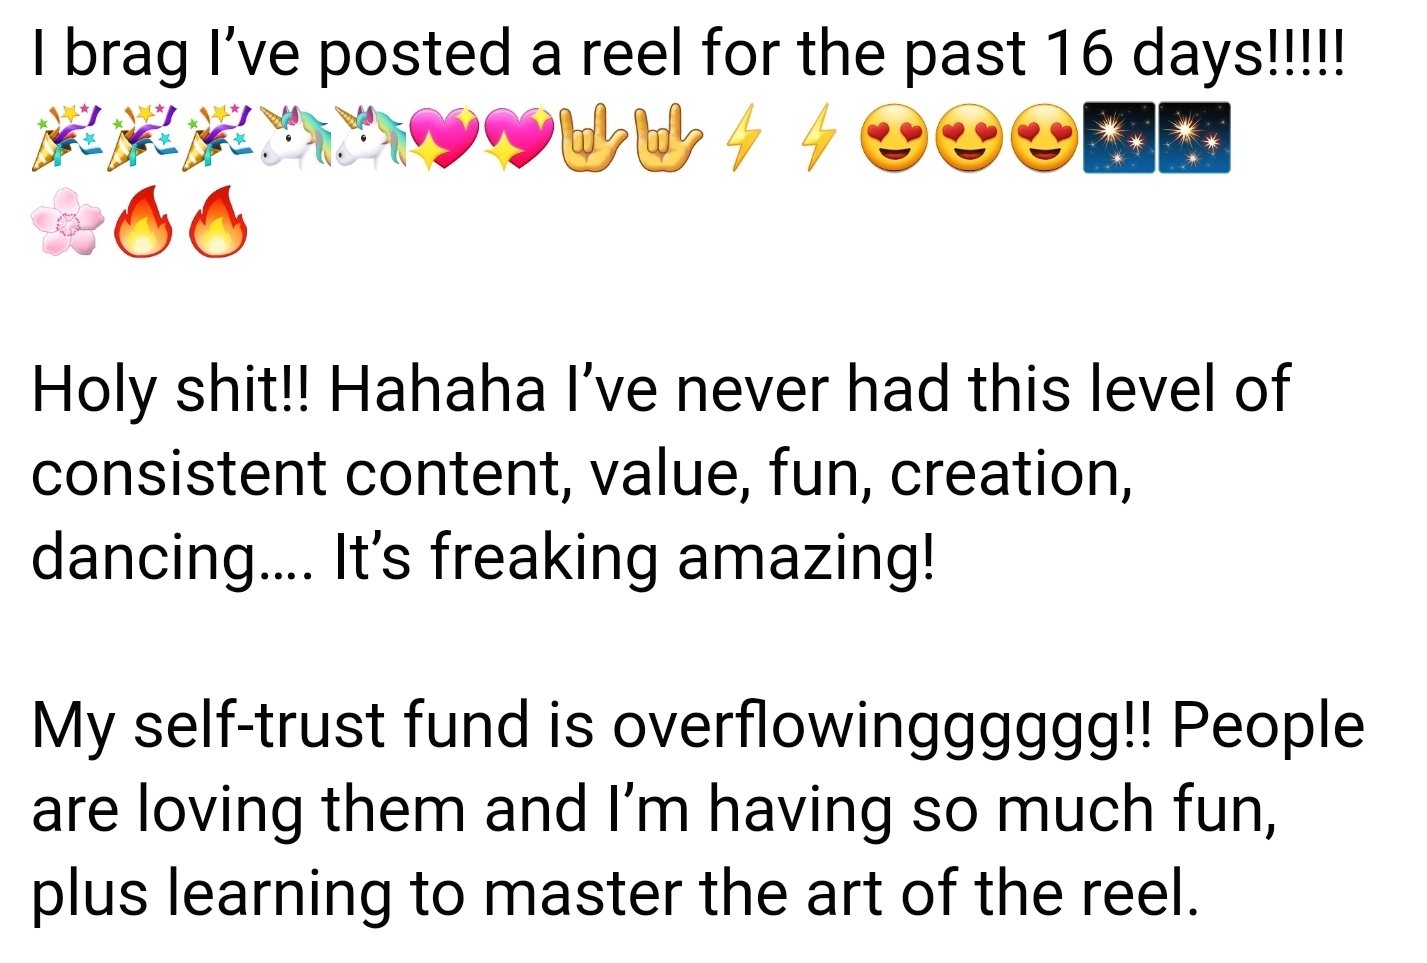 lh21 - my self trust fund is overflowing, been posting every day for 16 days.jpg